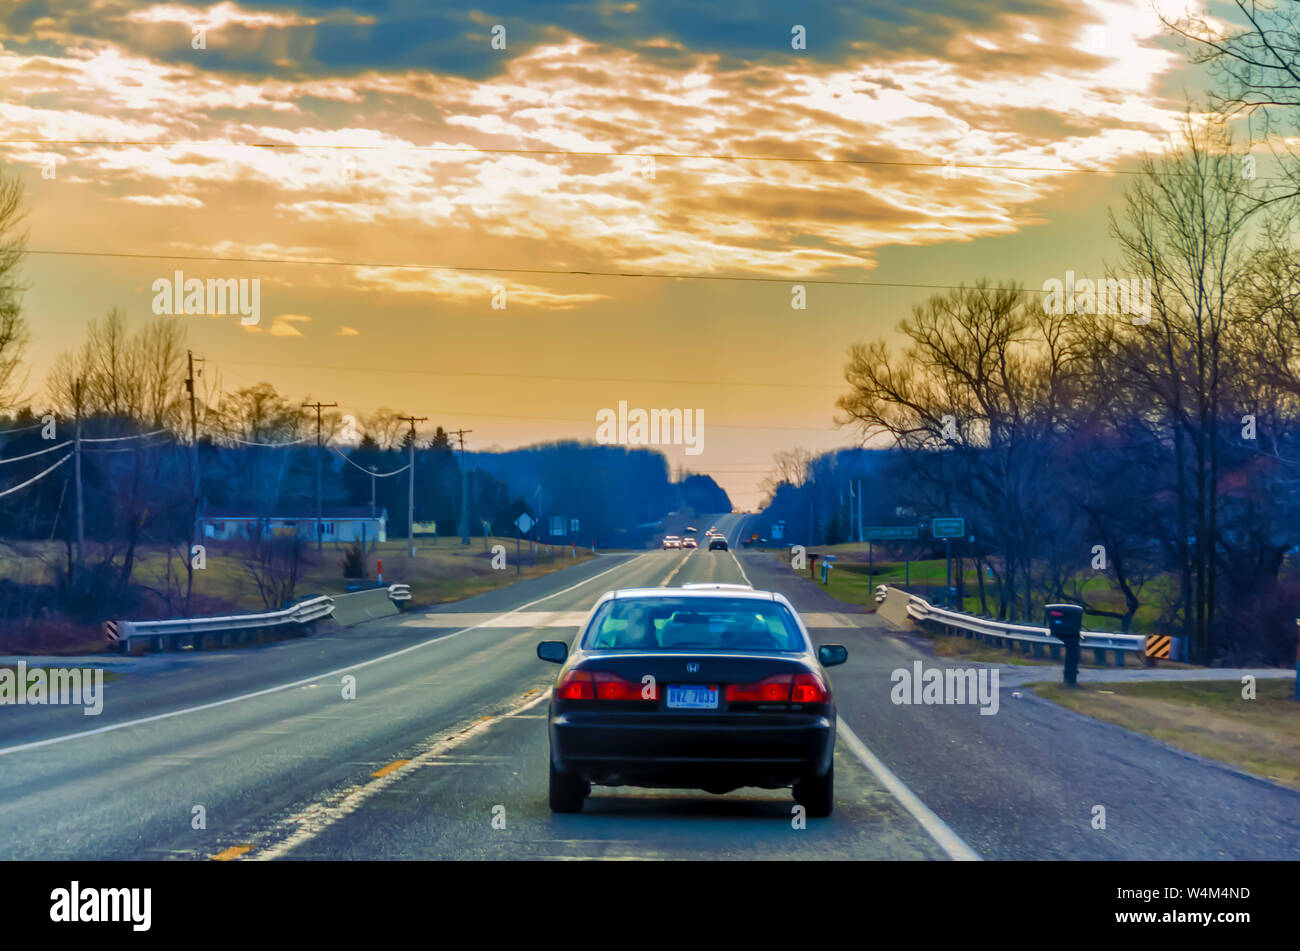 Cars plying on a Northern Michigan freeway, USA, under a colorful evening sky. Stock Photo